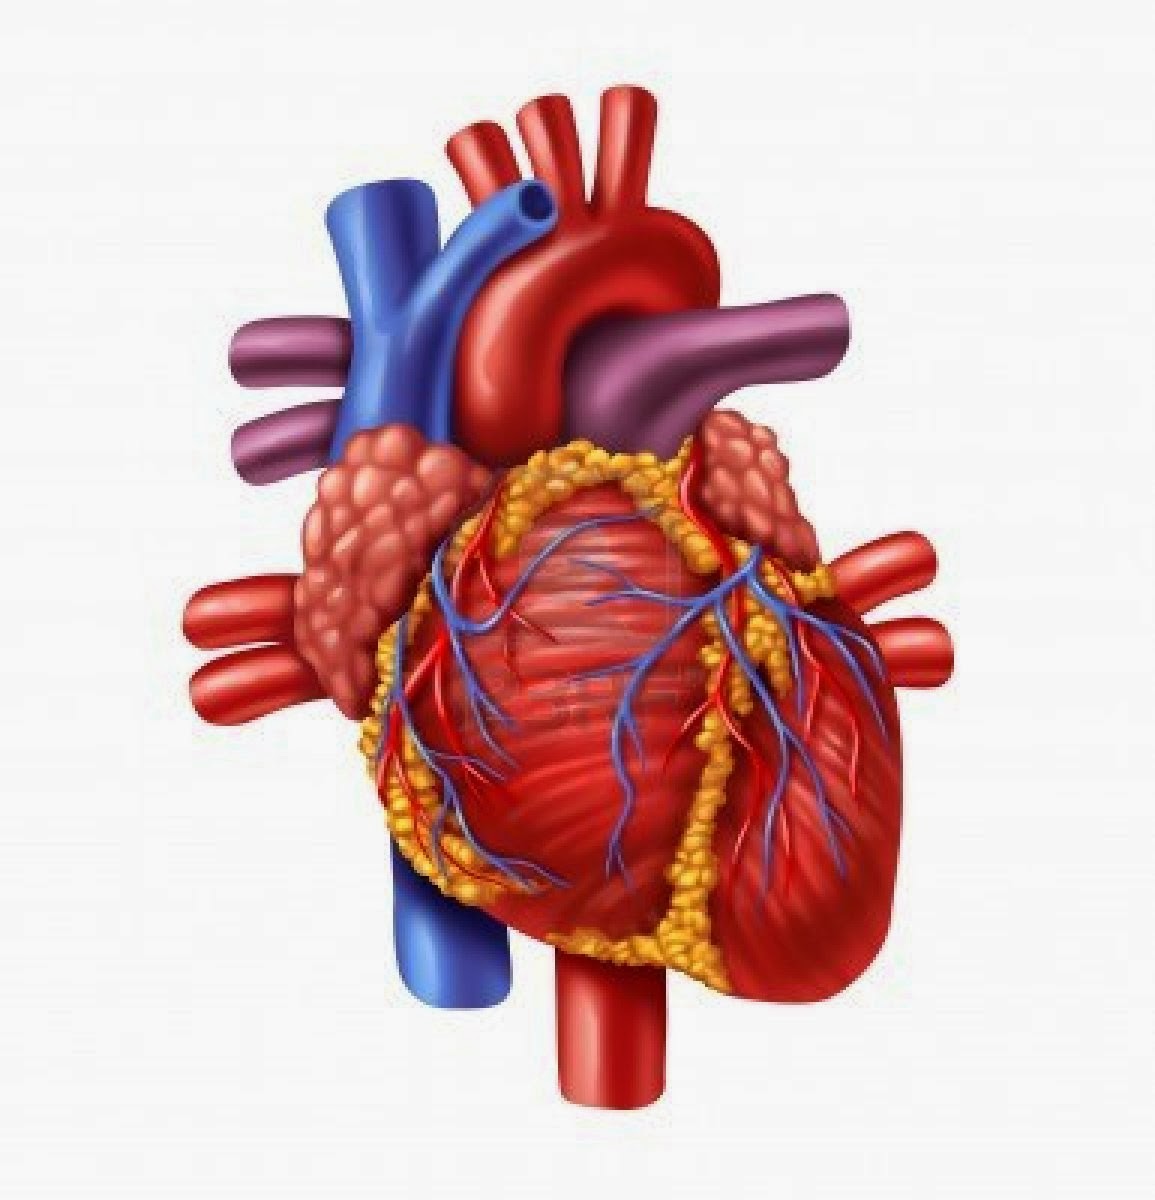 Heart Diagram Unlabeled - Cliparts.co